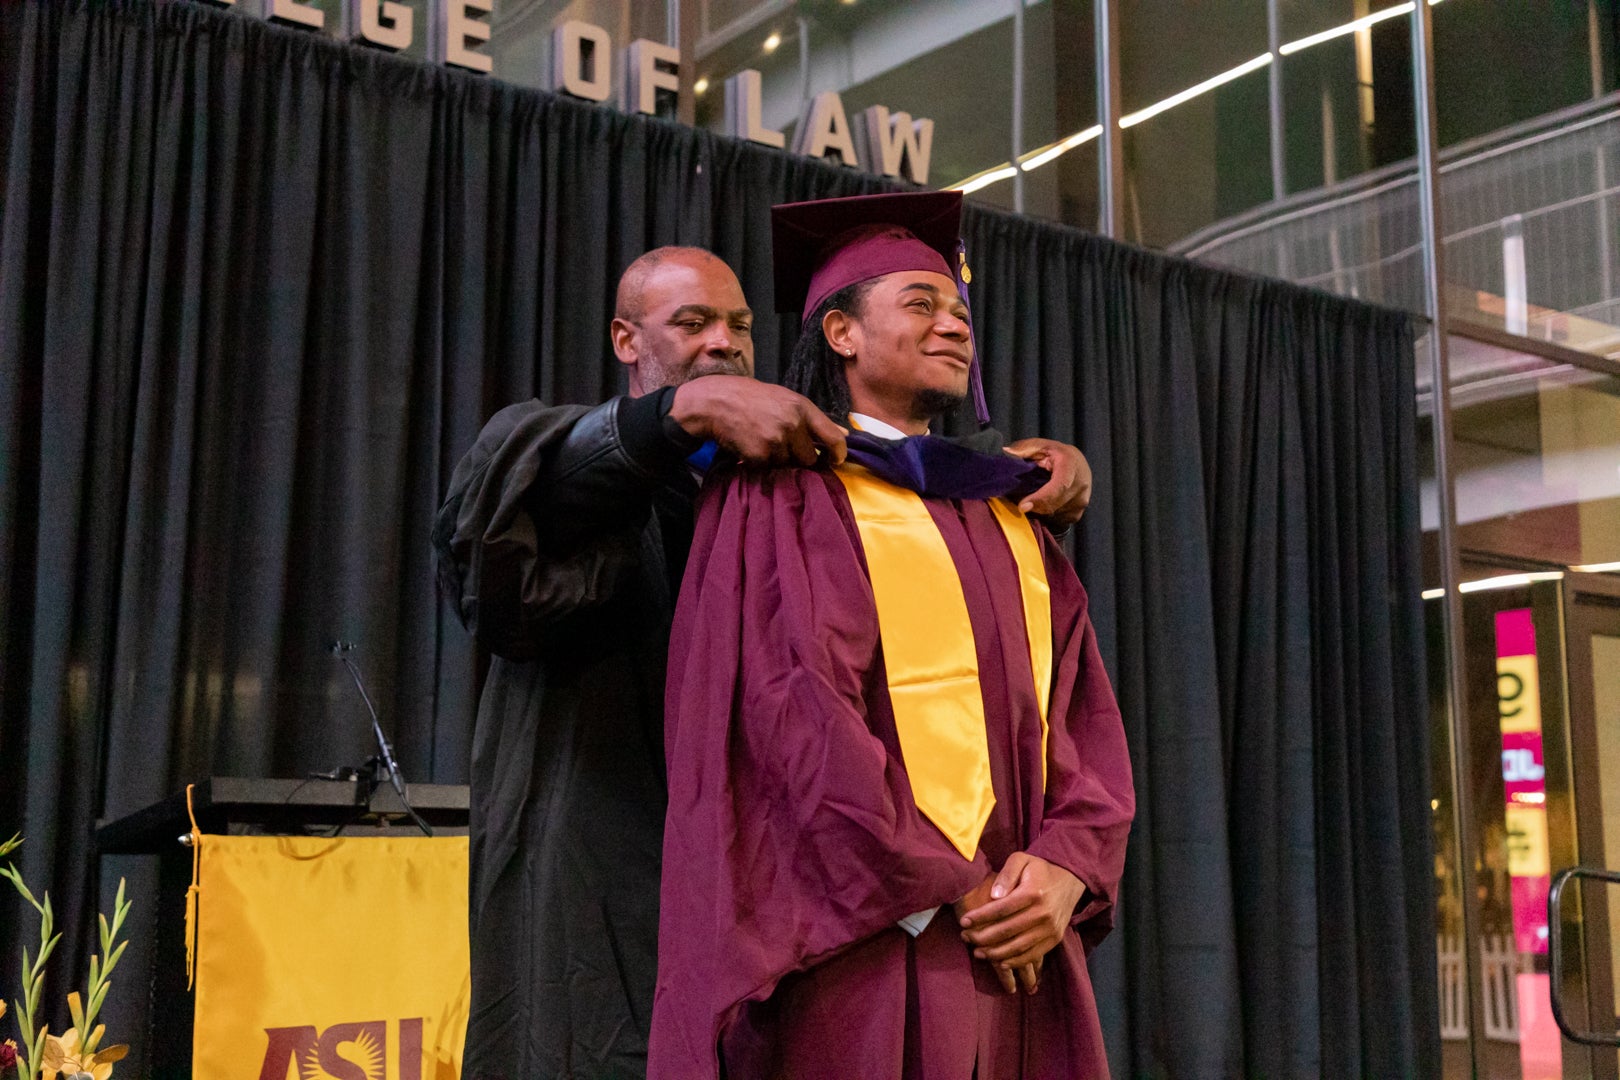 Don Gibson putting a robe on a MLS graduate student during the ASU Law convocation ceremony.